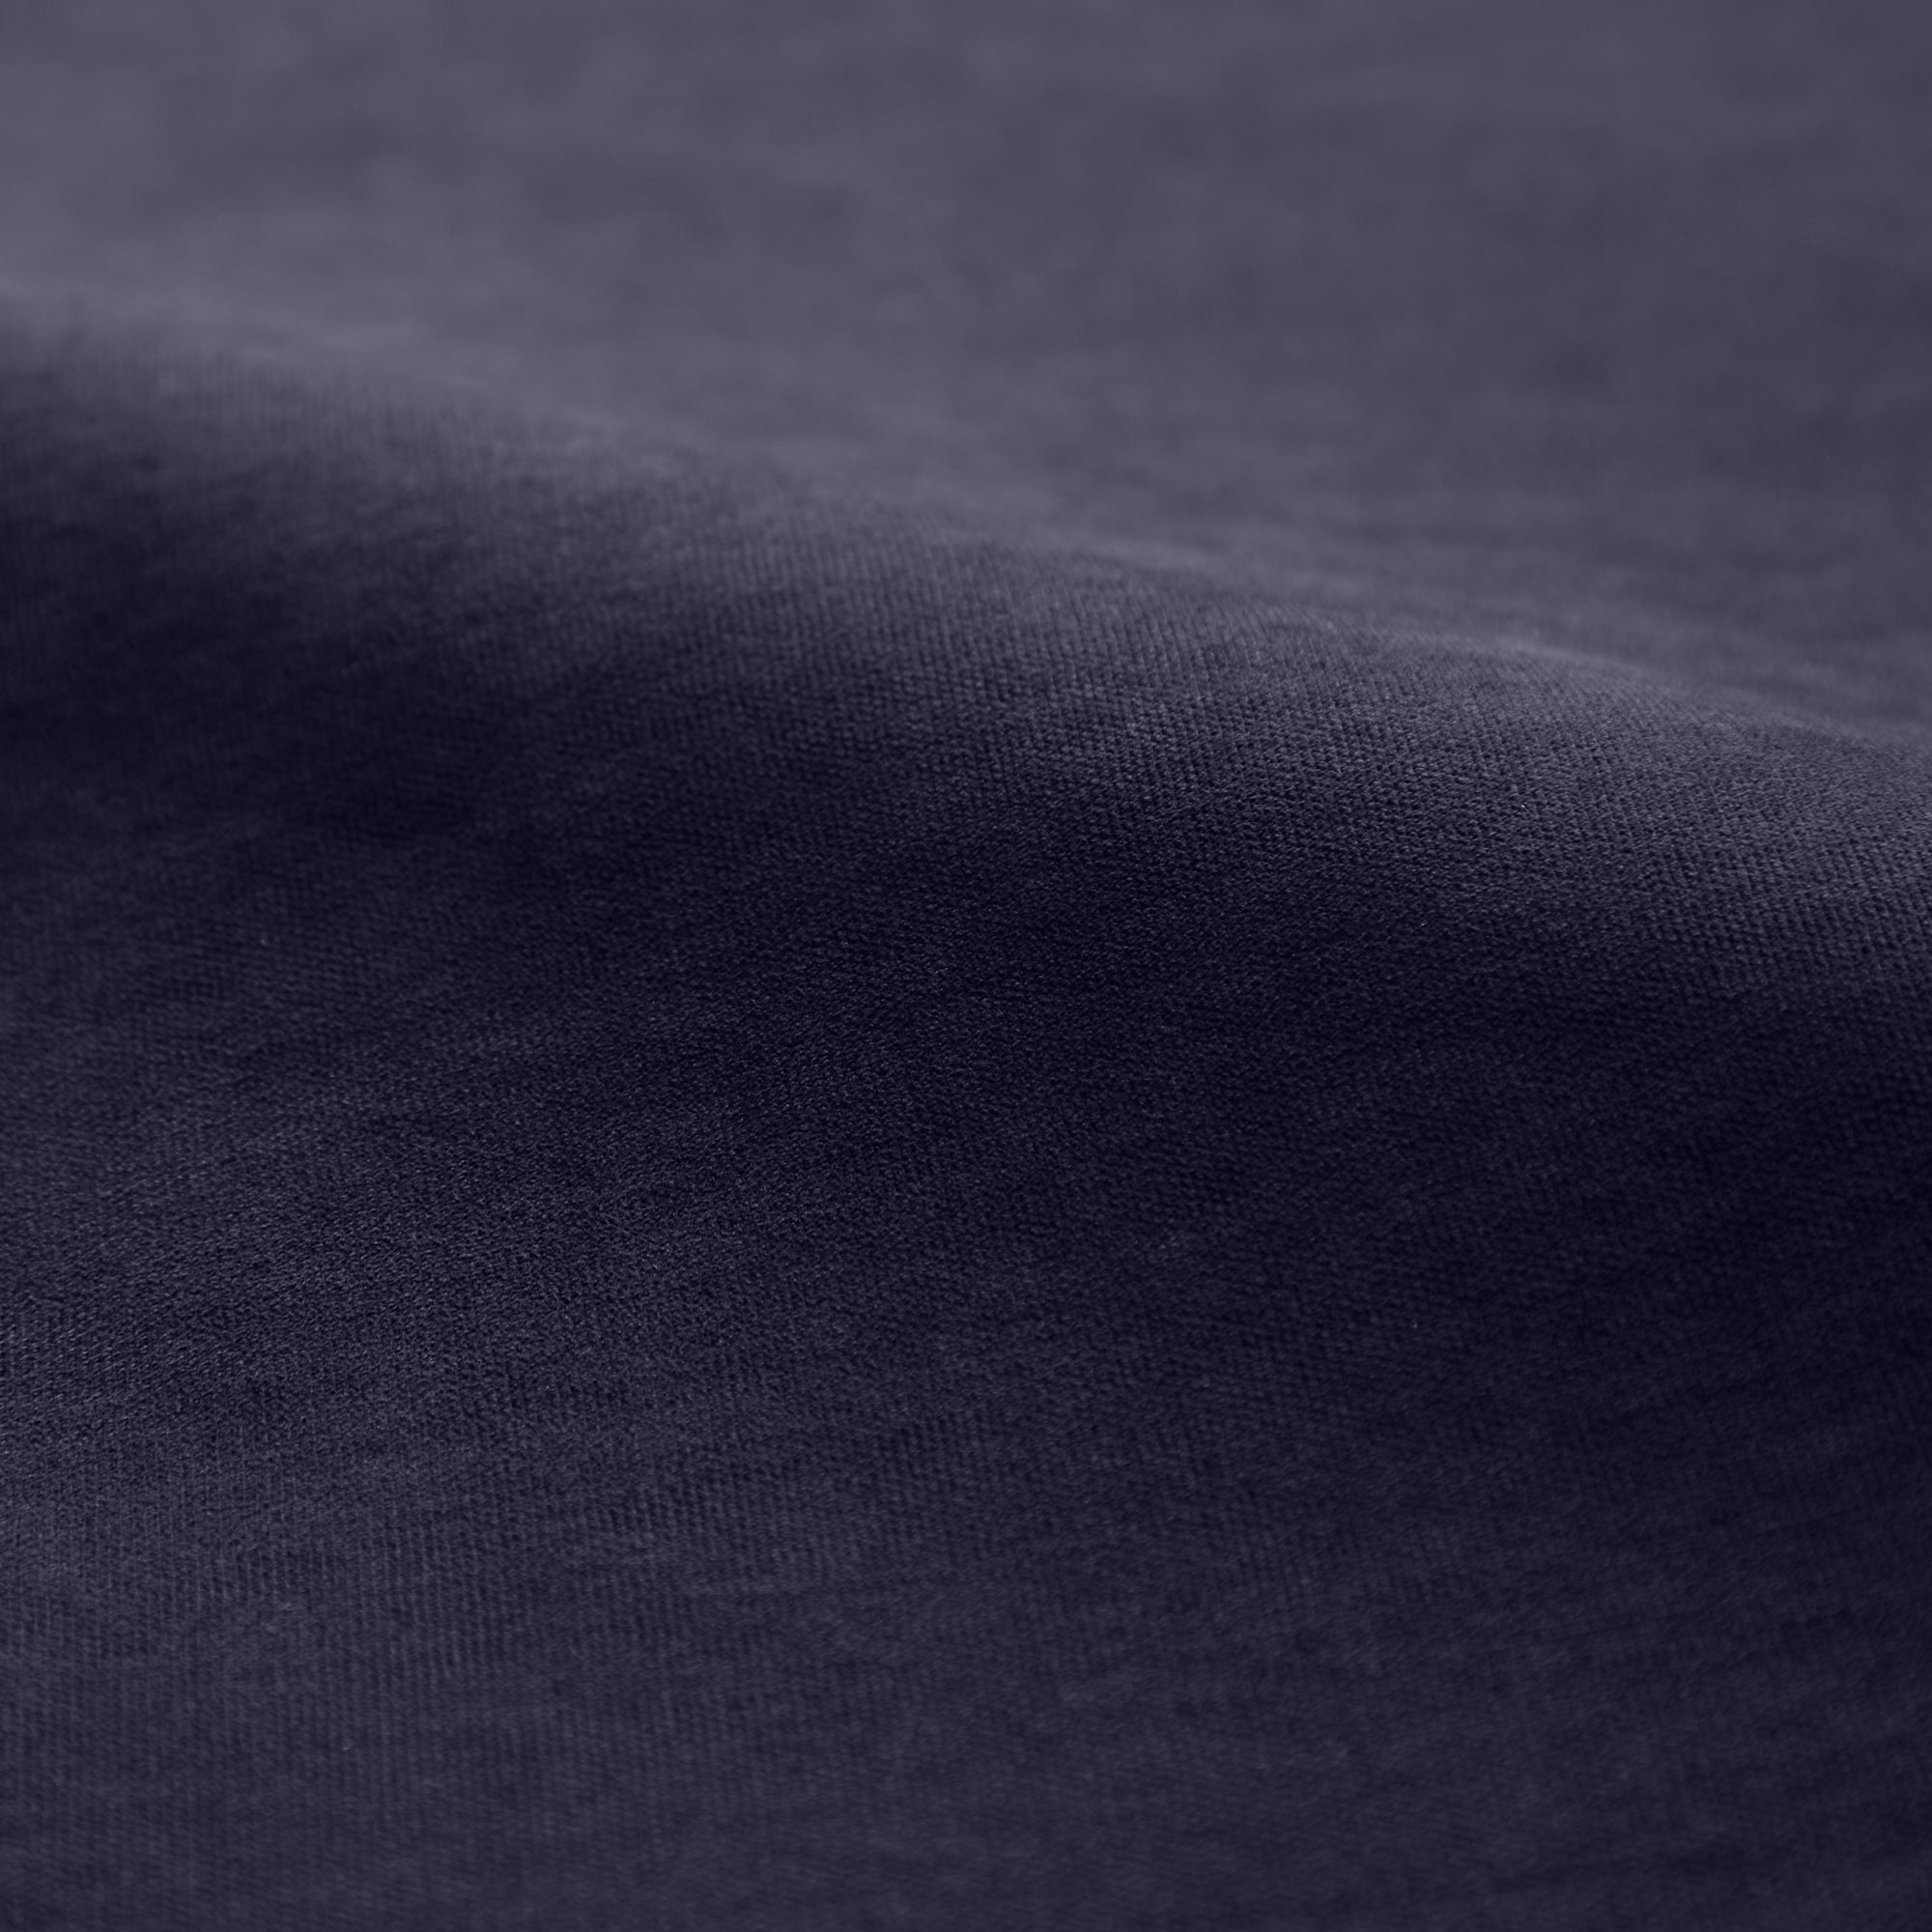 Belvoir Recycled Polyester Made to Measure Fabric Sample Belvoir Indigo